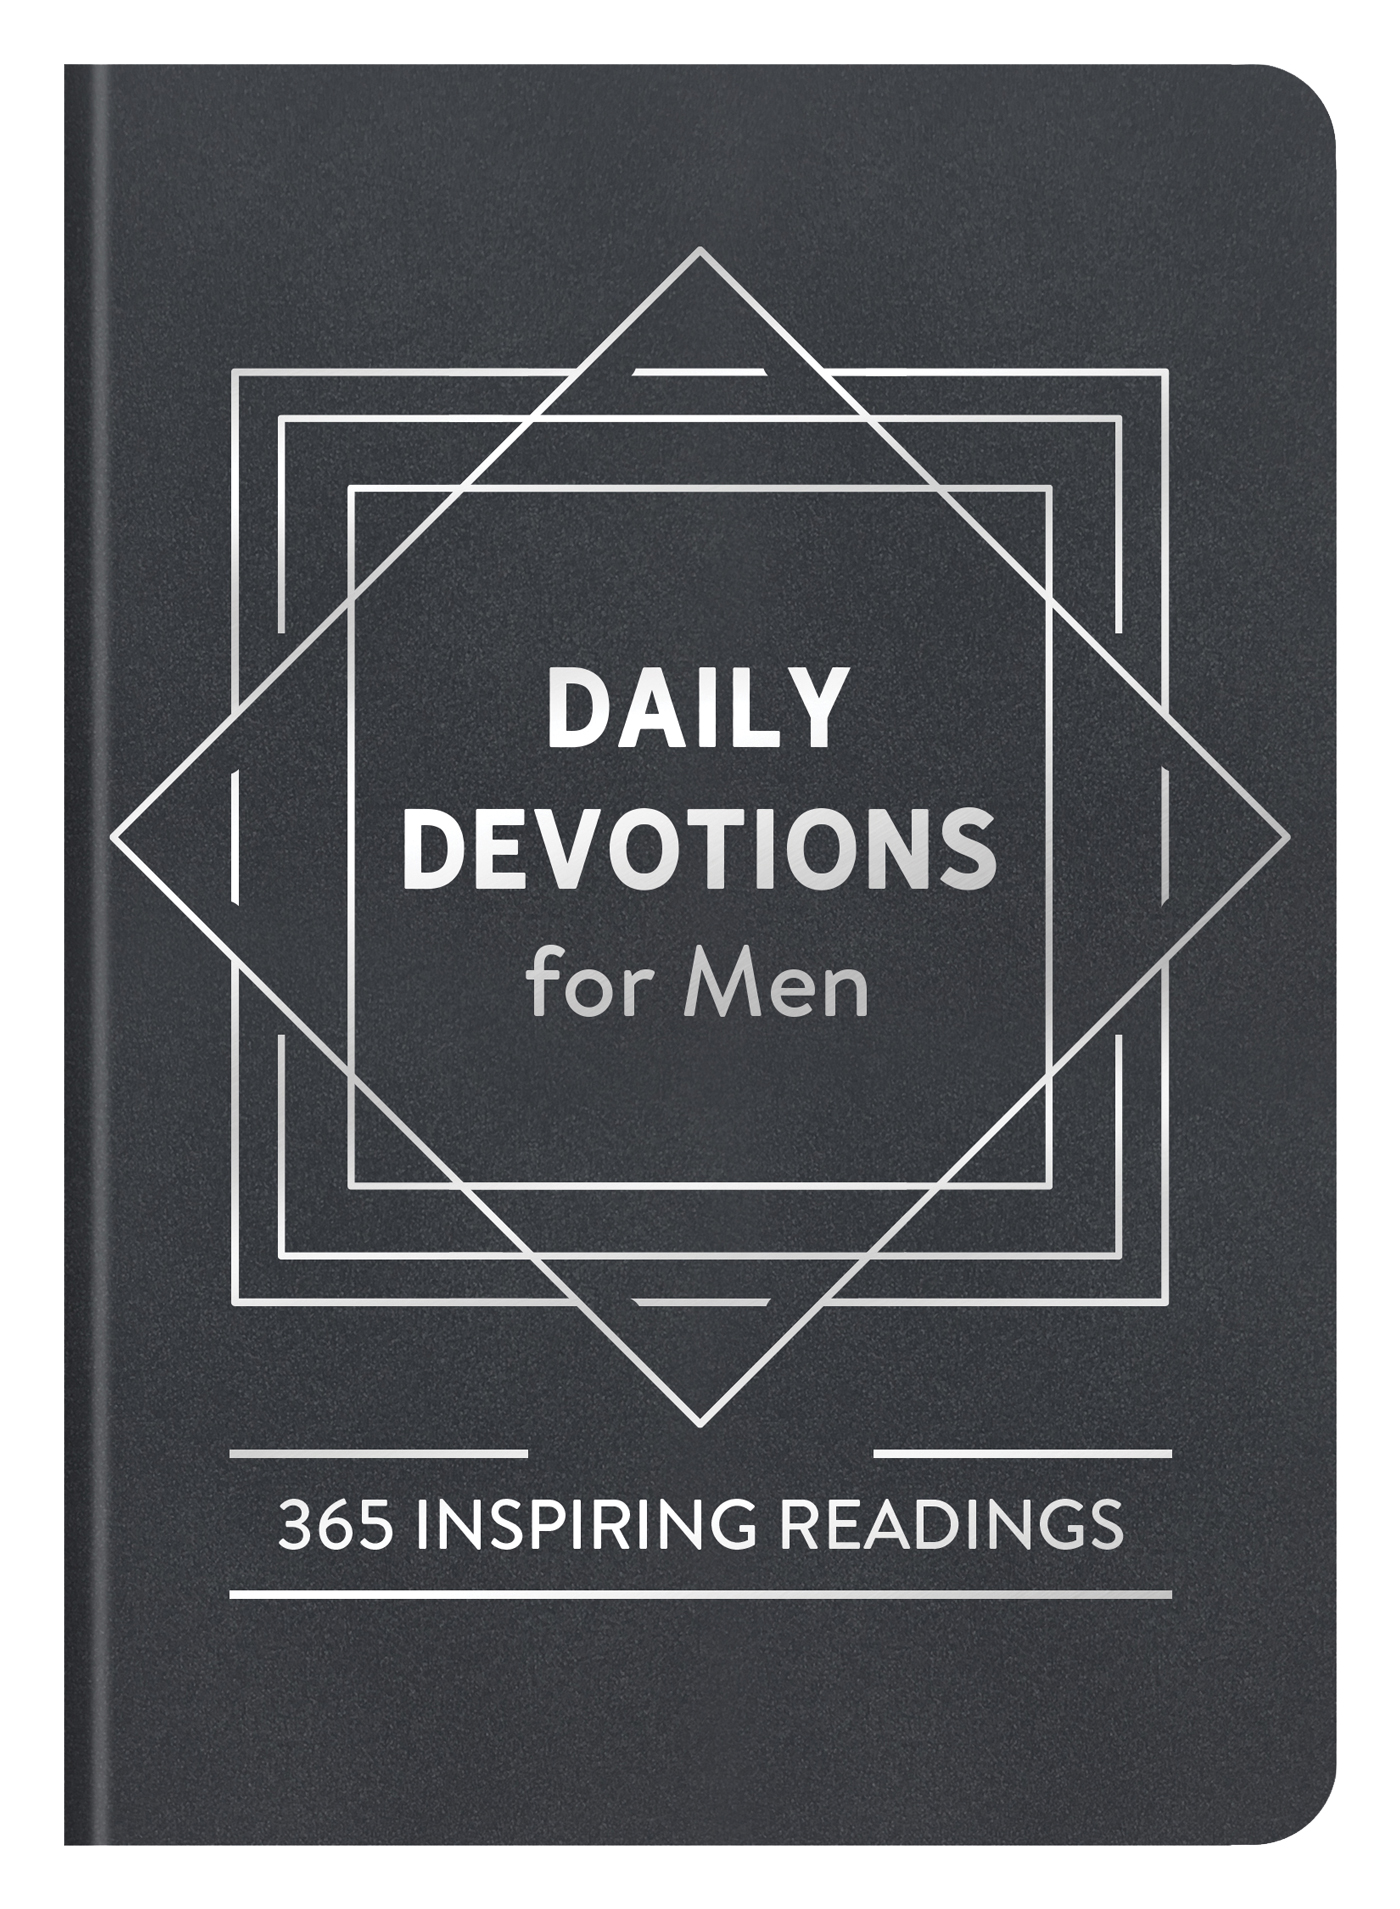 Daily Devotions for Men Free Delivery Eden.co.uk